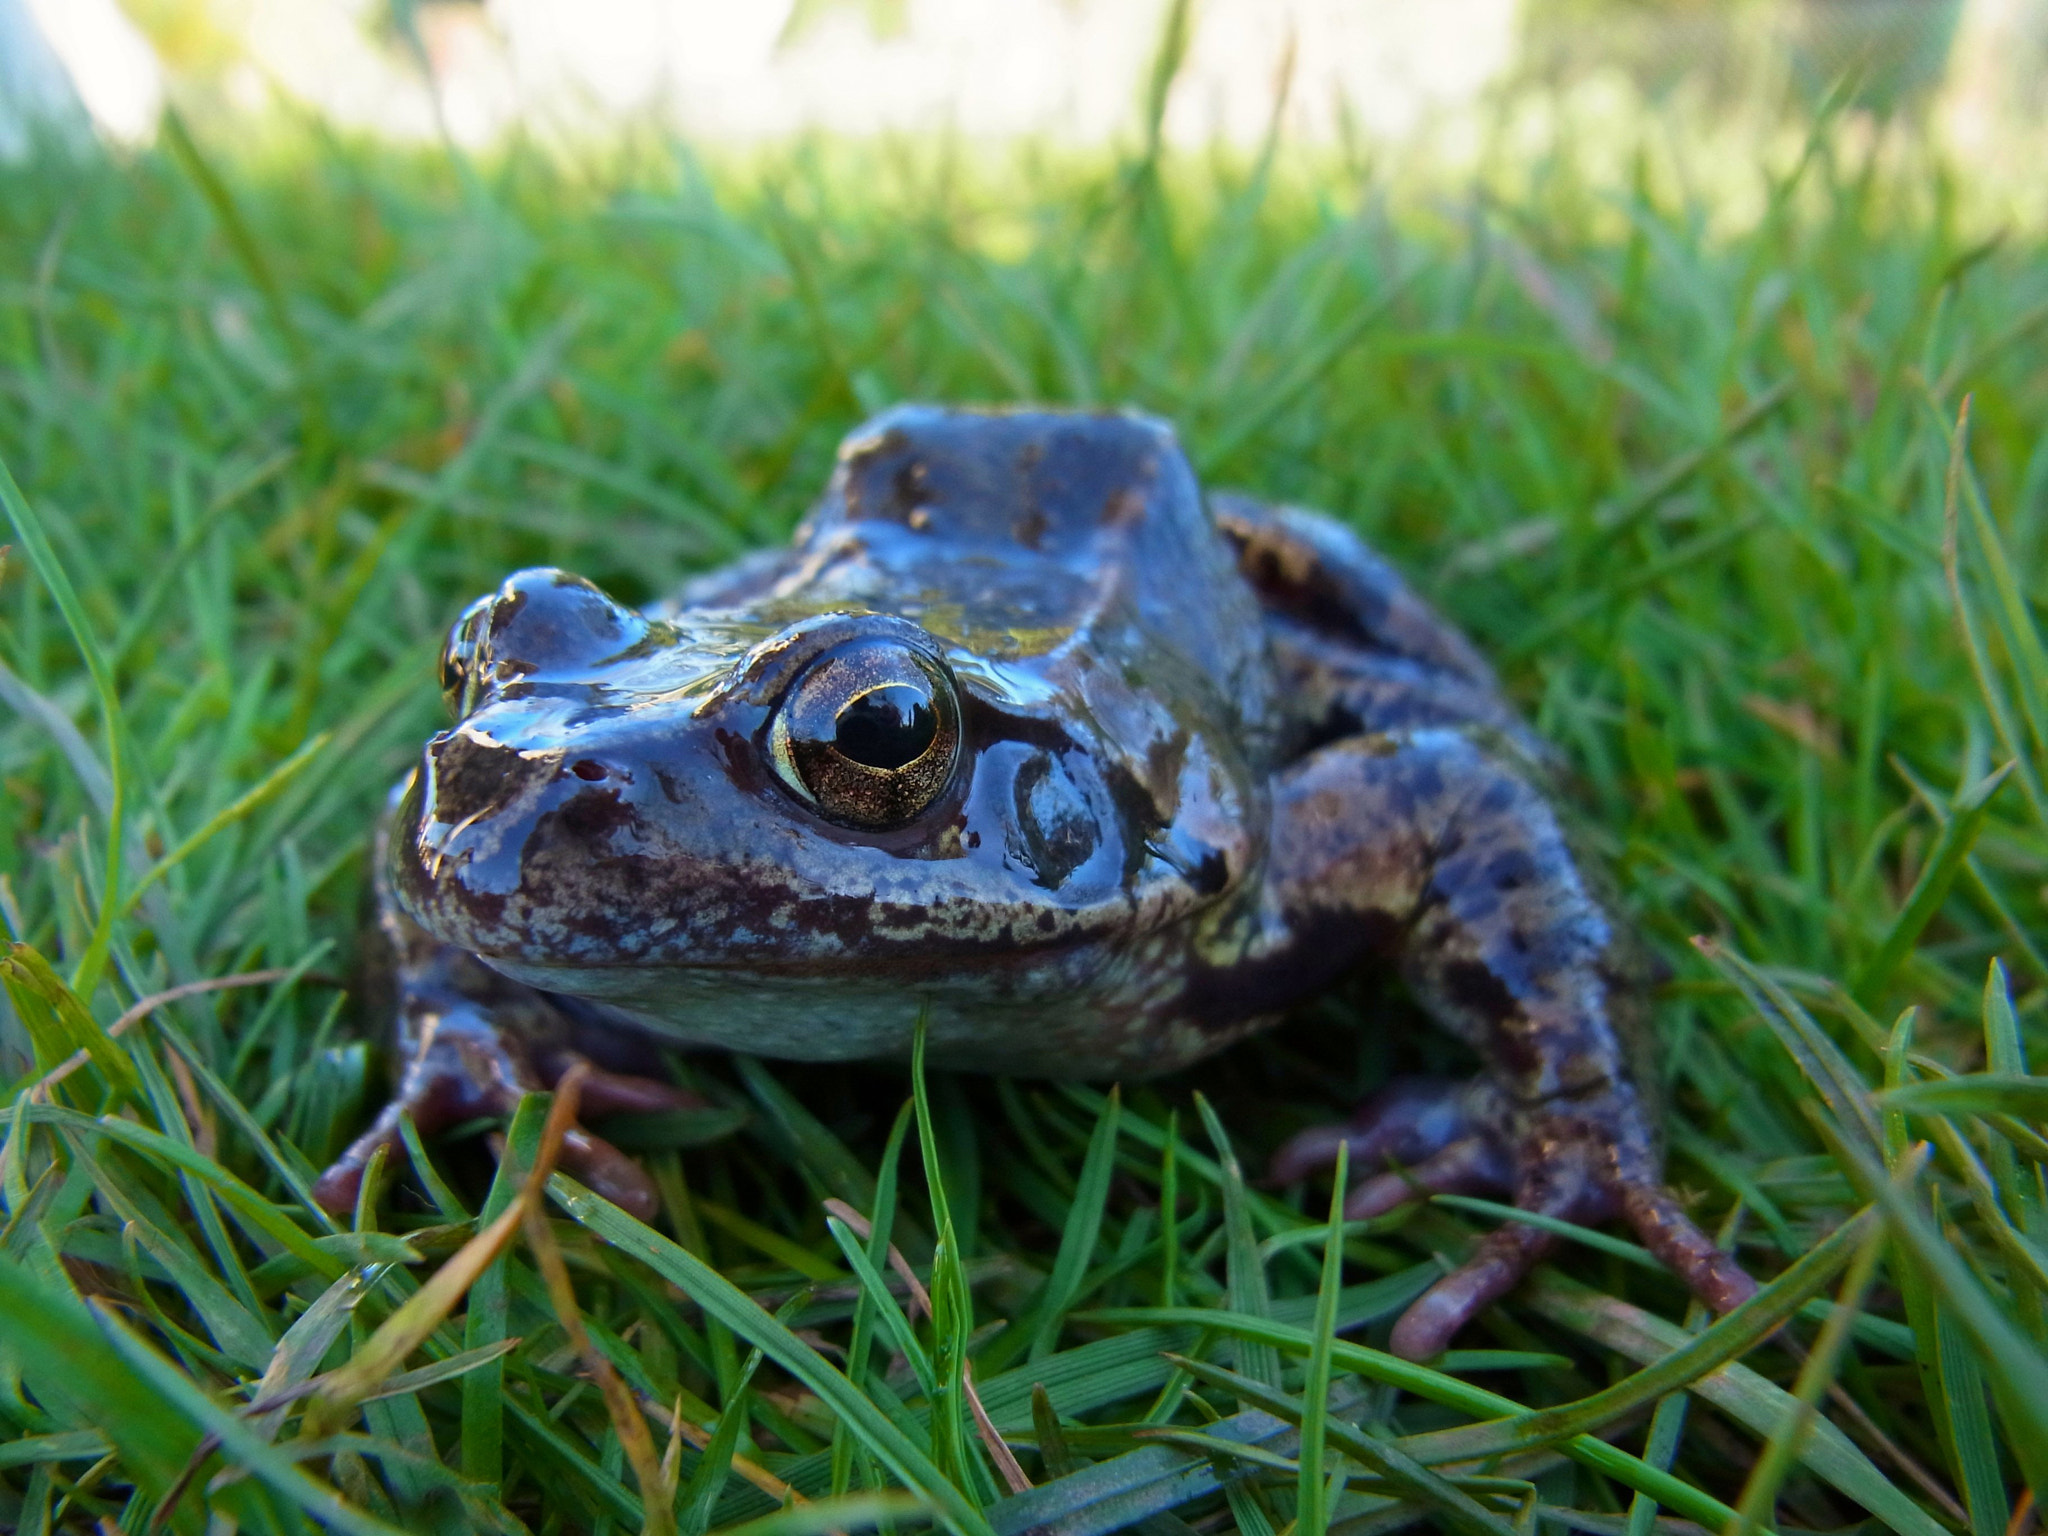 RICOH ZOOM LENS sample photo. Grass frog close-up photography